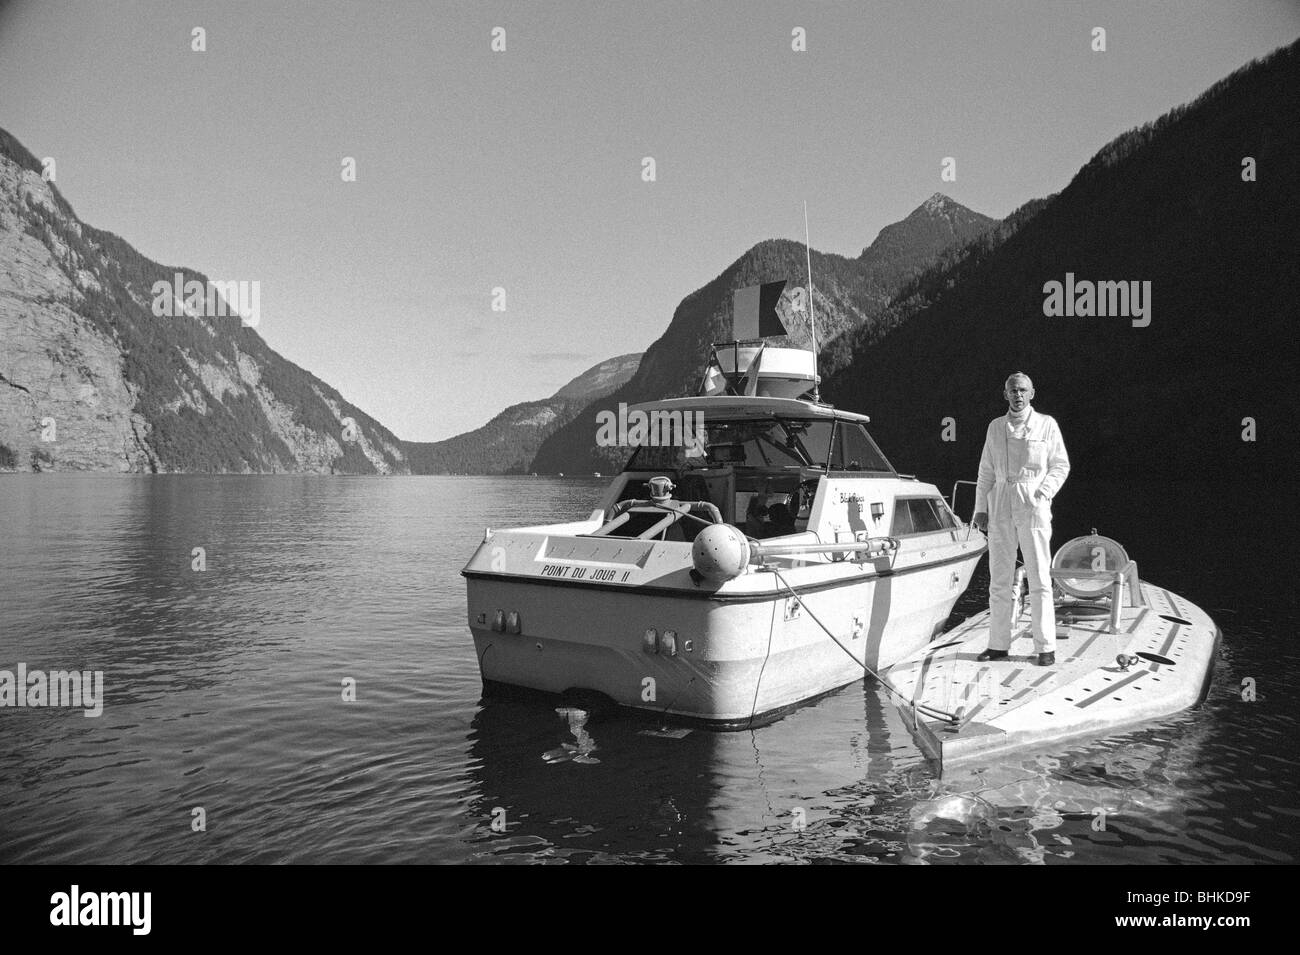 Piccard, Jacques, 28.7.1922 - 1.11.2008, Swiss scientist (deep sea diver), full length, in submarine 'F. A. Forel' on lake Königsee, Germany, 26.9.1988, Stock Photo